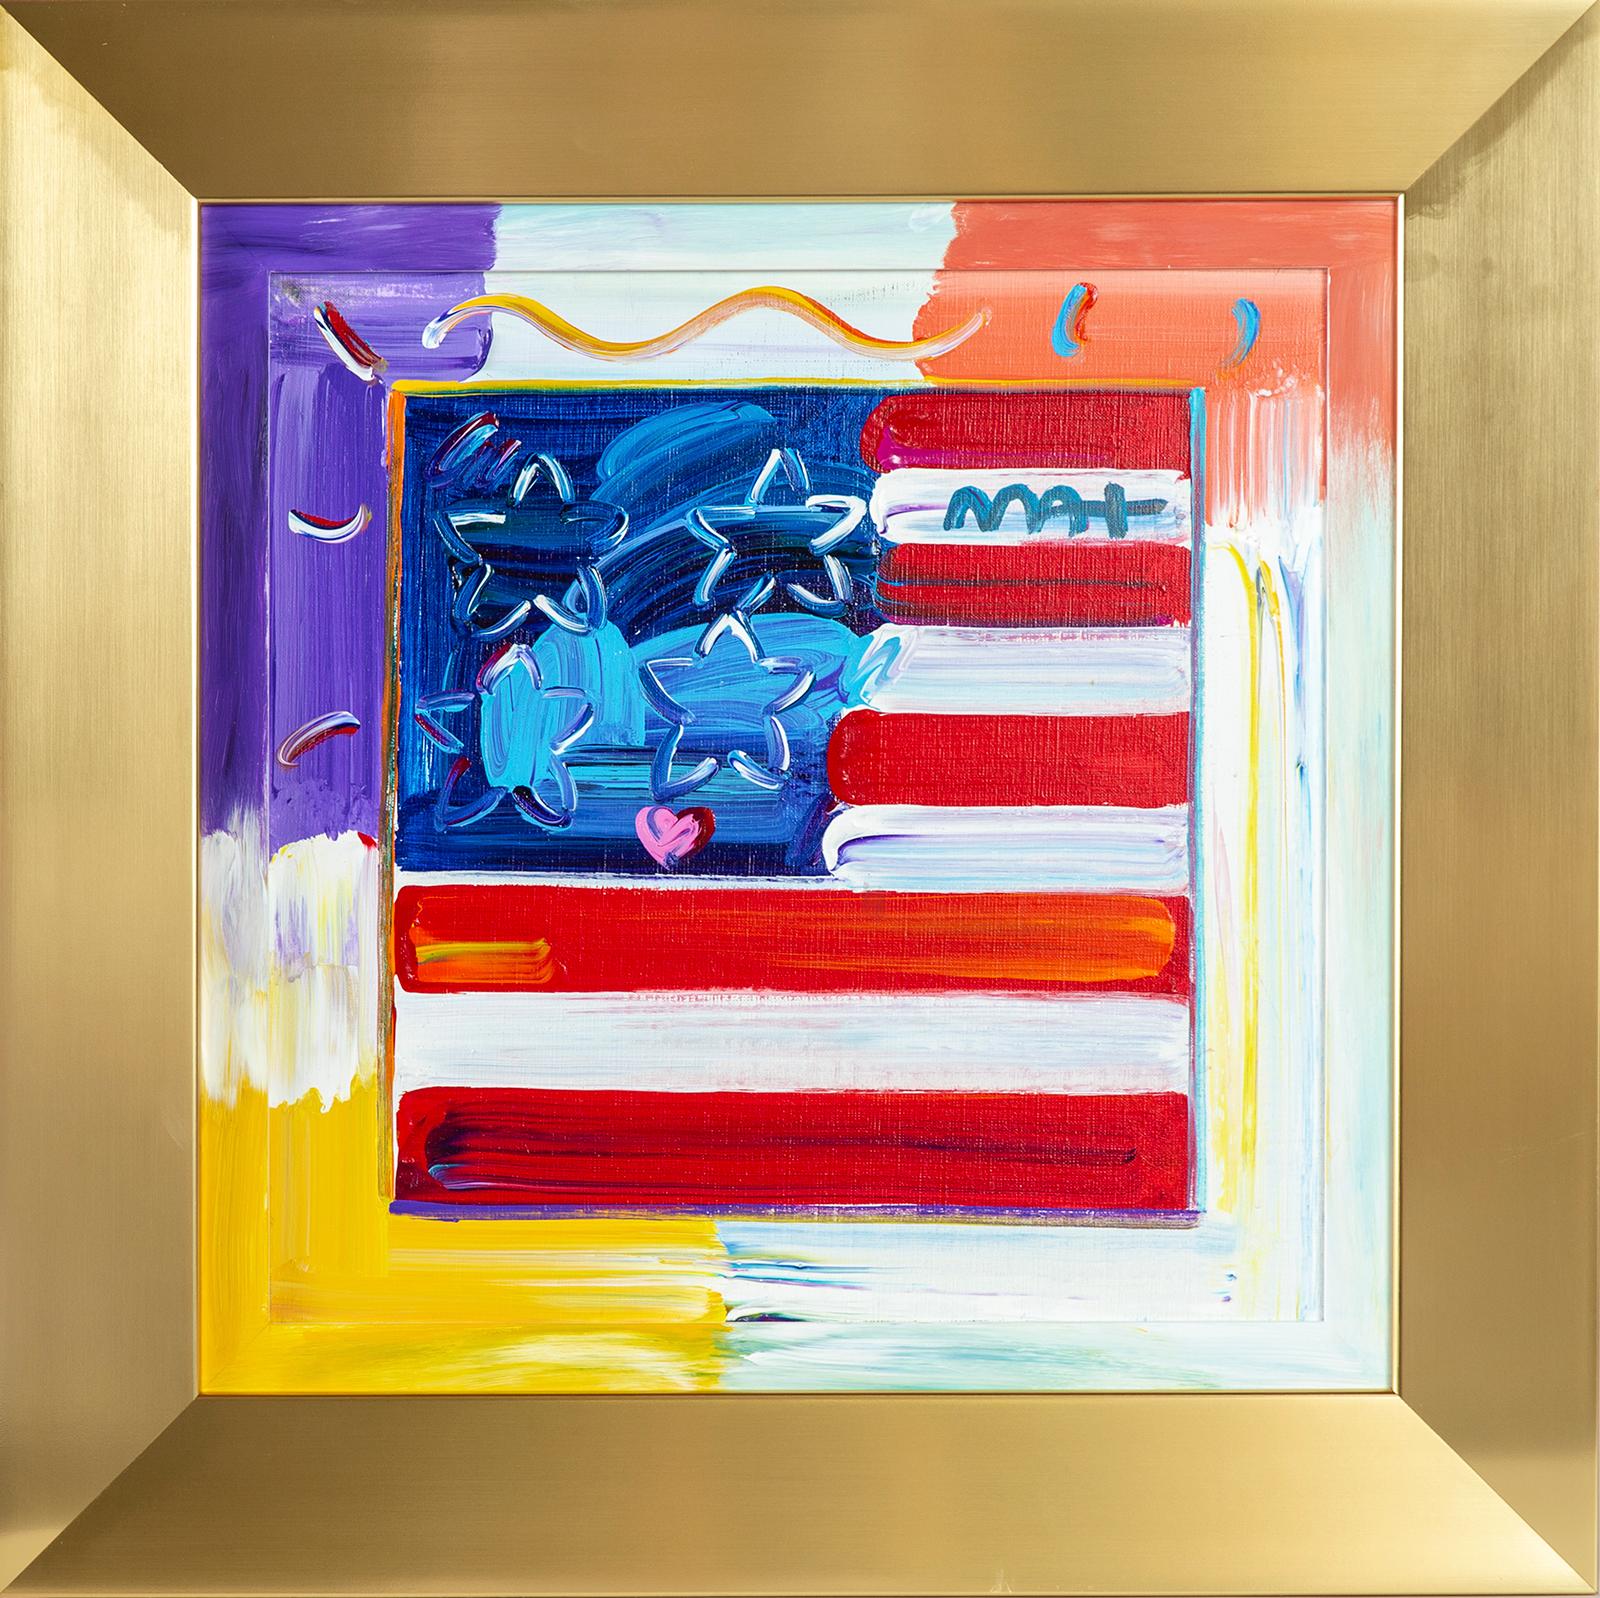 Artist: Peter Max
Title: Flag with Heart
Medium: Original Acrylic Painting on Canvas
Size: 16x16, 23.5 x 23.5 framed
Year: 2013
Studio Number 296559.0000 also marked and stamped on the back of the canvas

Peter Max Original Acrylic Painting on